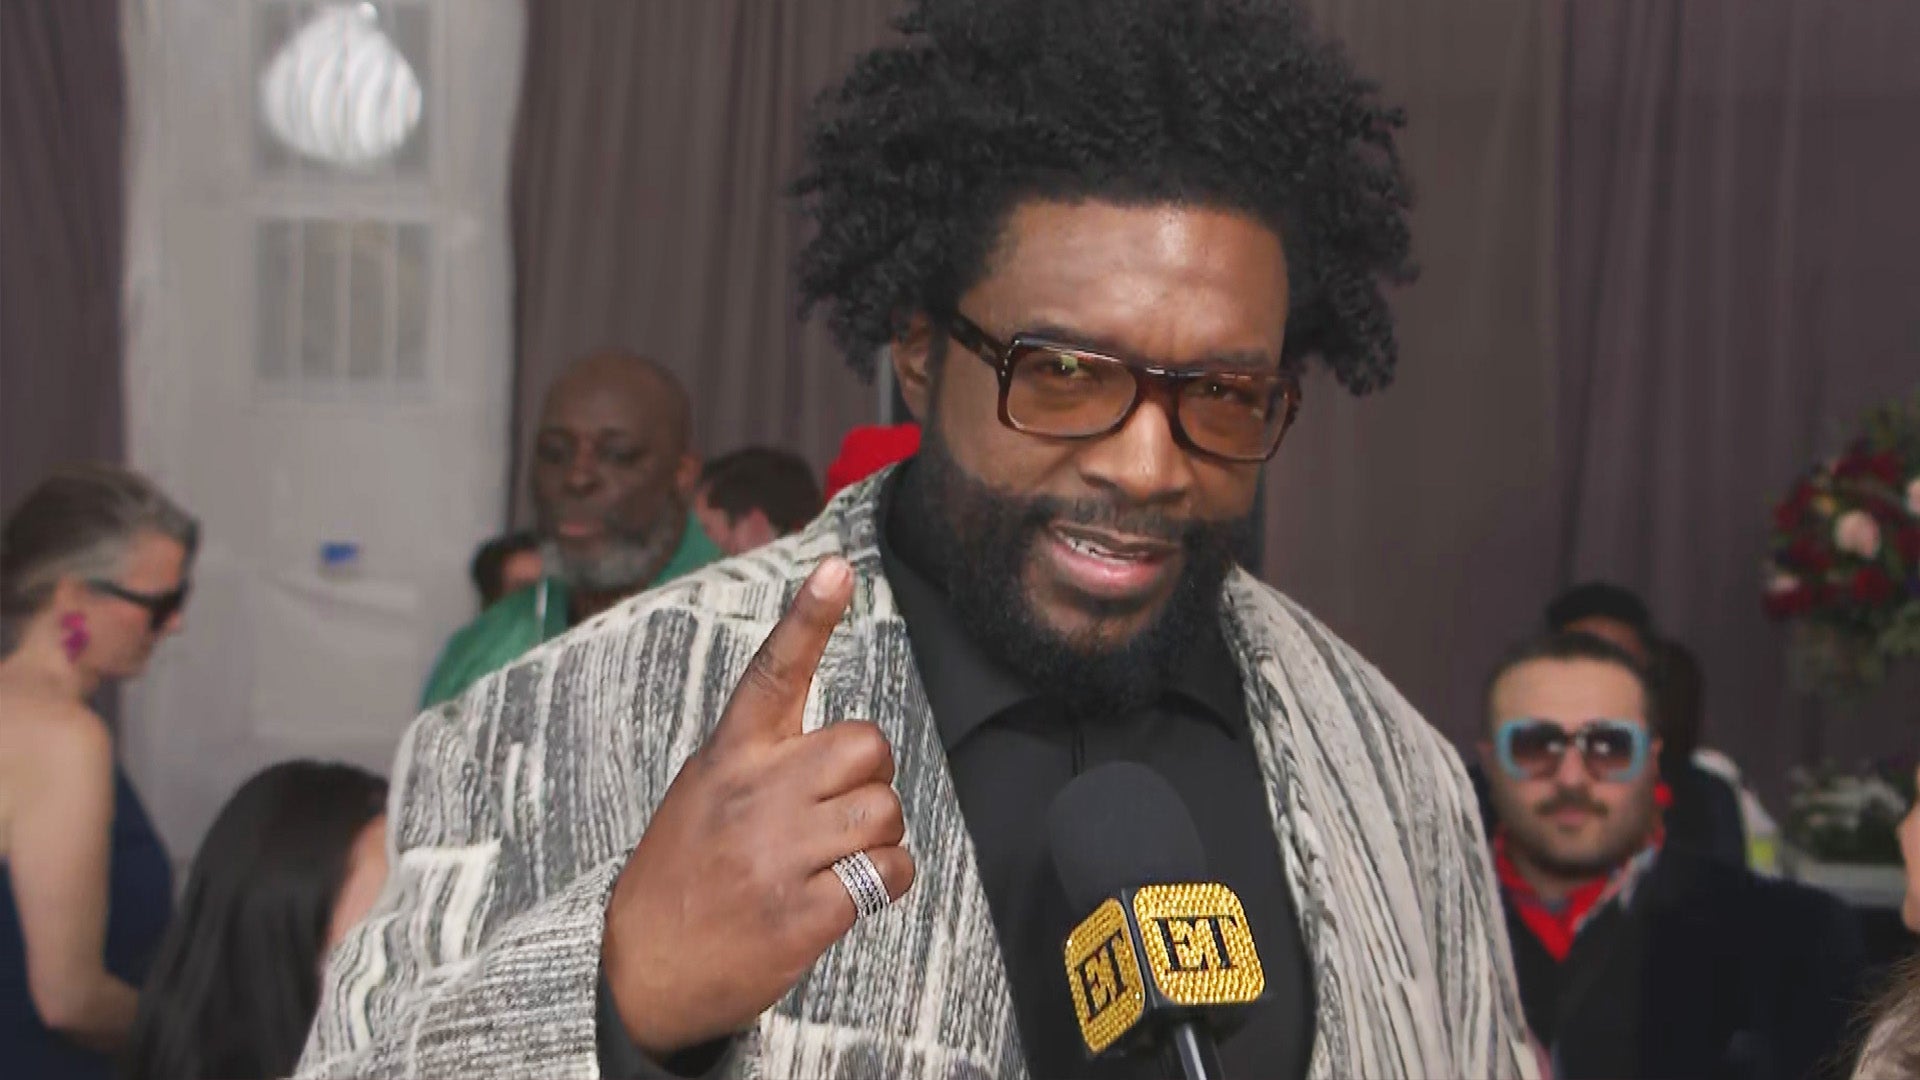 Questlove's Game Night With Taylor Swift Wasn't a Weed Party